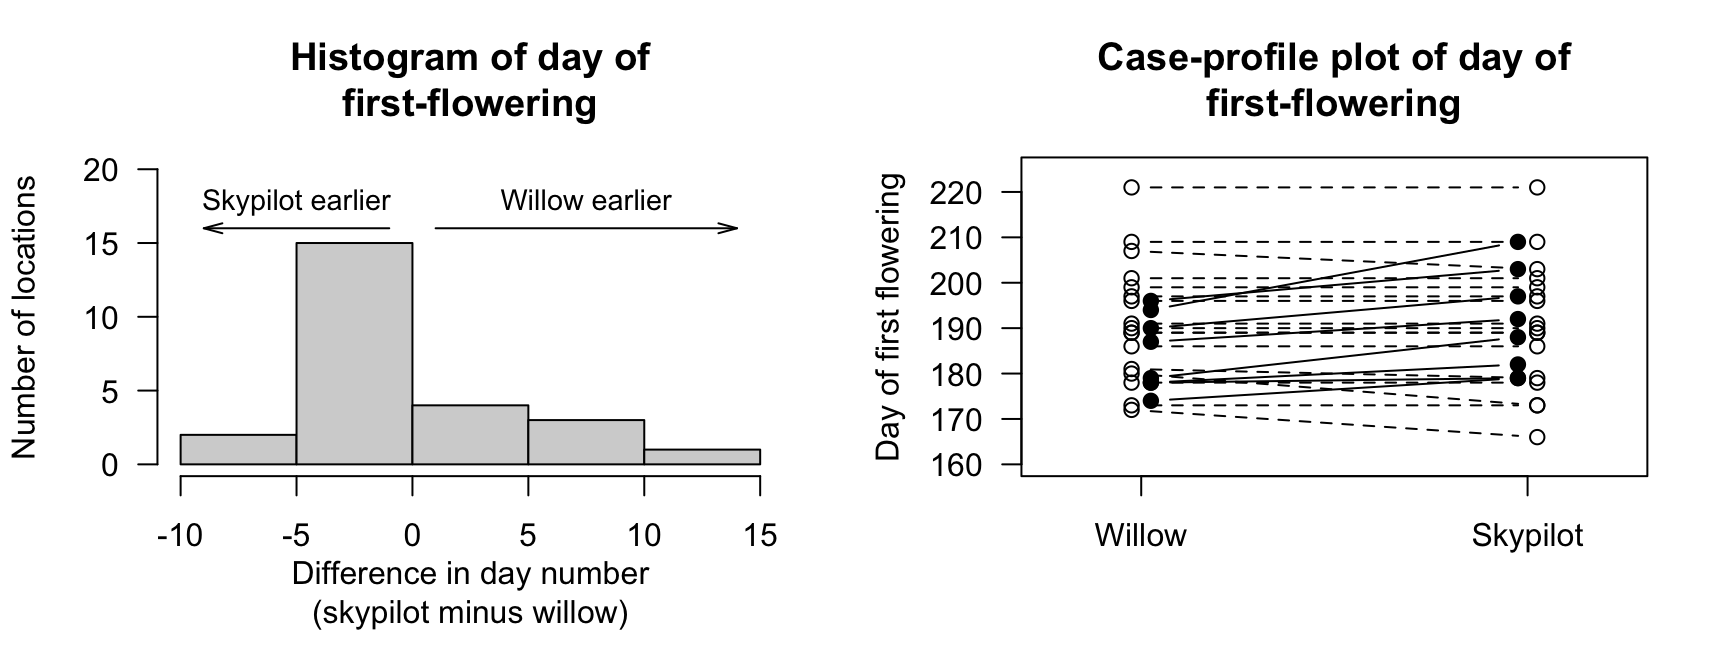 The flowering-day data. Left: a histogram of the difference between the first-flowering days (skypilot minus willow). Right: a case-profile plot of days of first flowering (unfilled points and dashed lines indicate earlier dates (smaller values) for willow)